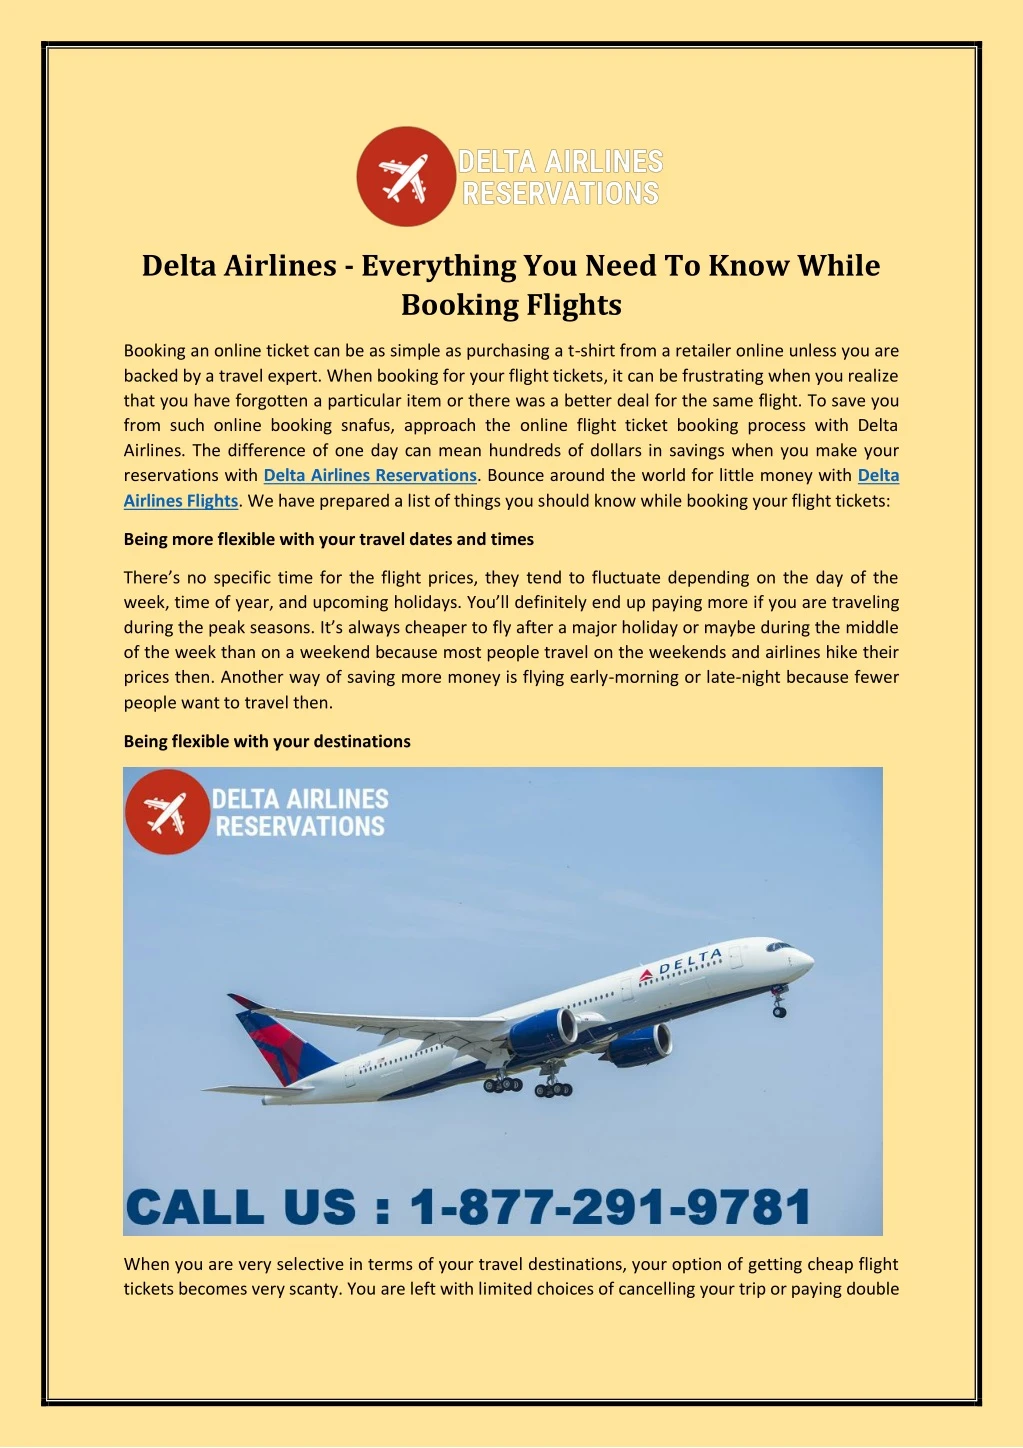 delta airlines everything you need to know while